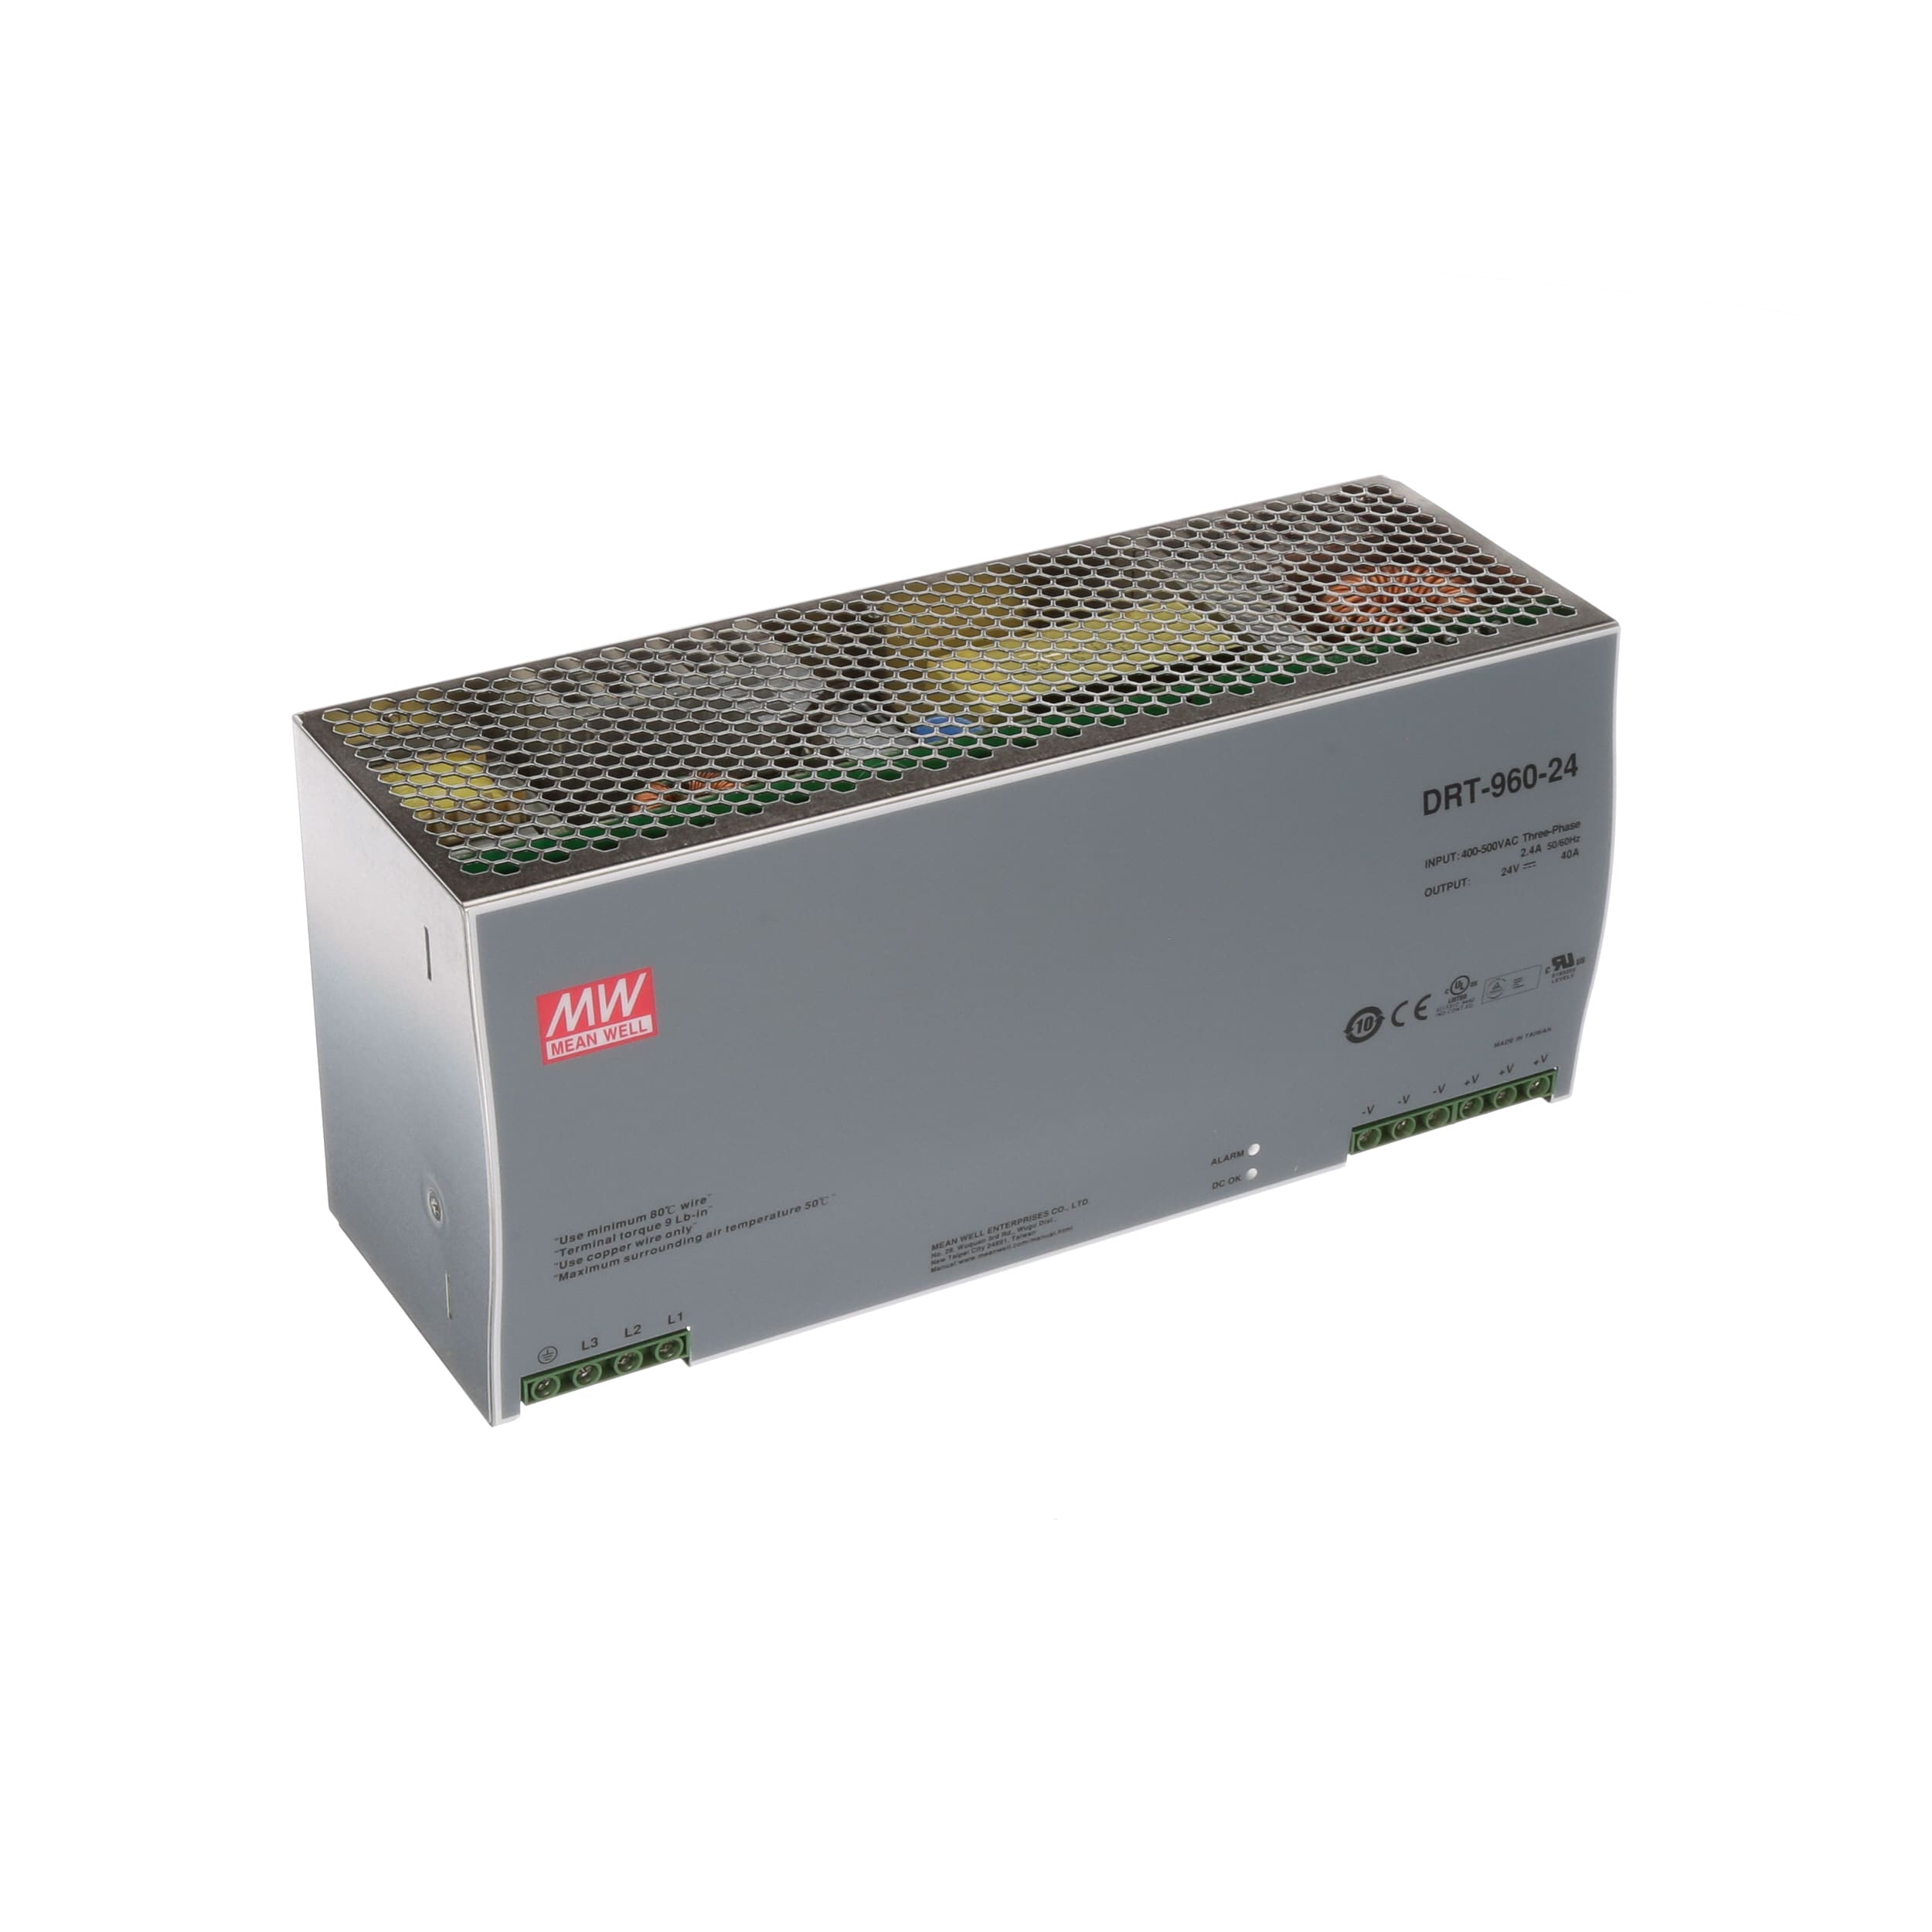 One Mean Well Drt-960-24 24v 40a Switching Power Supply for sale online 